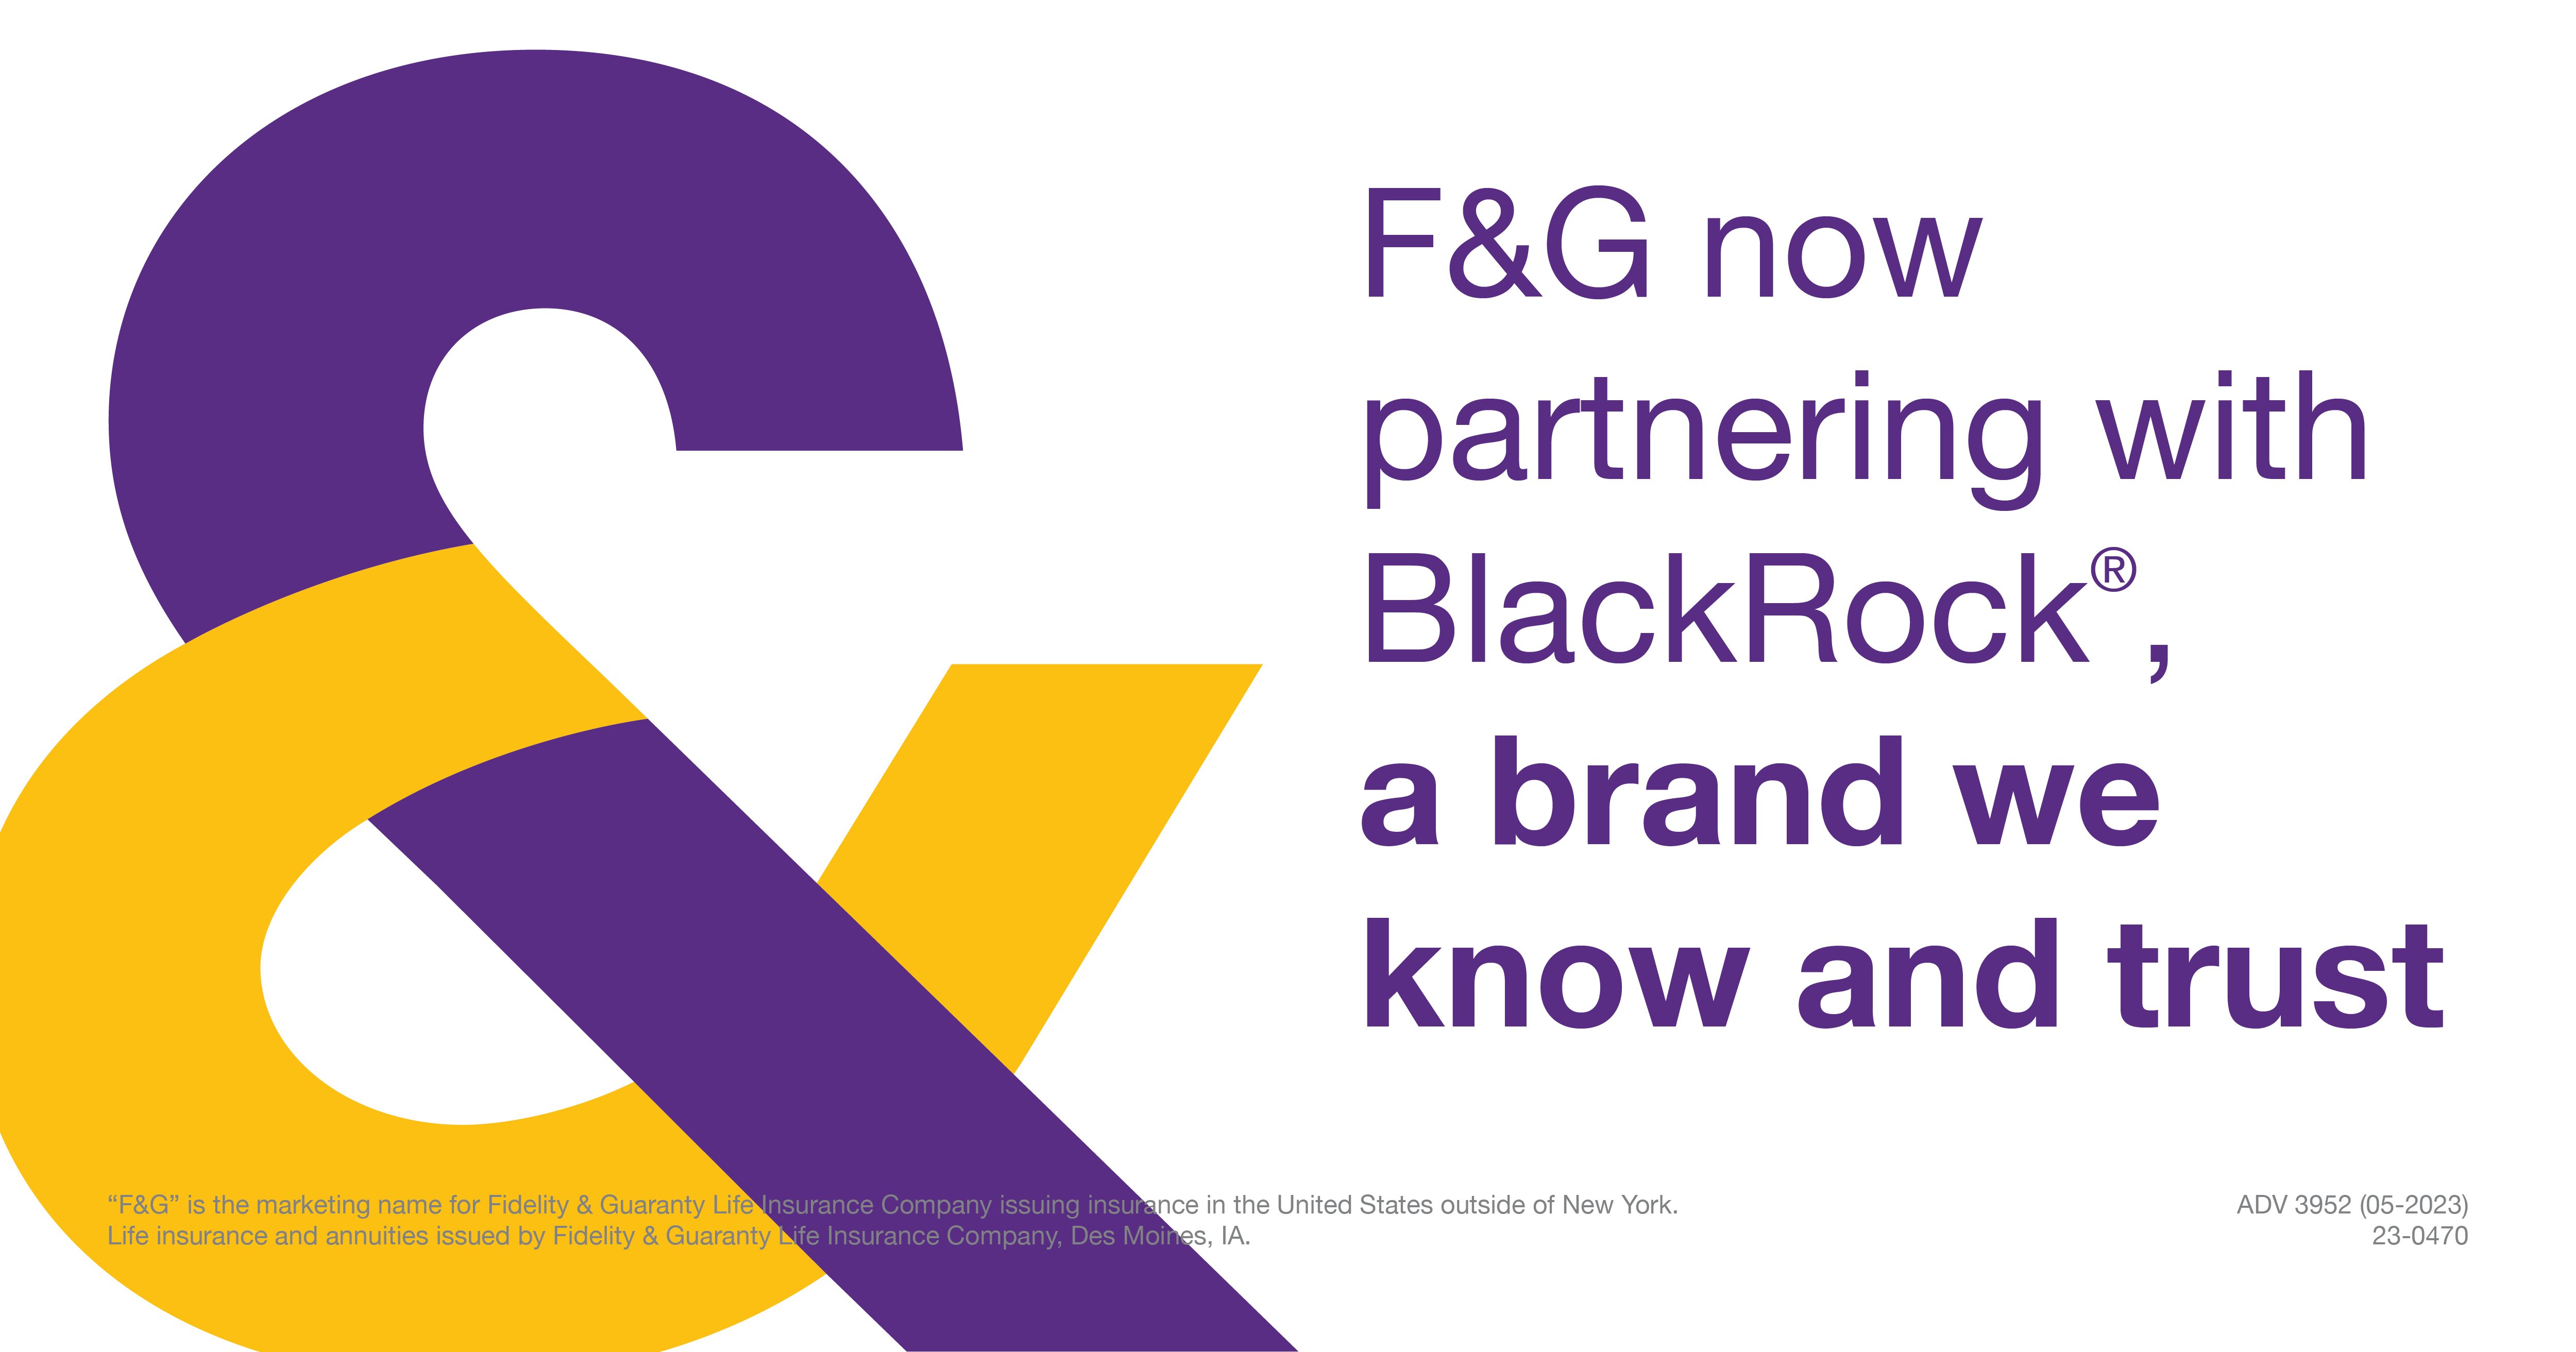 F&G now partnering with BlackRock, a brand we know and trust